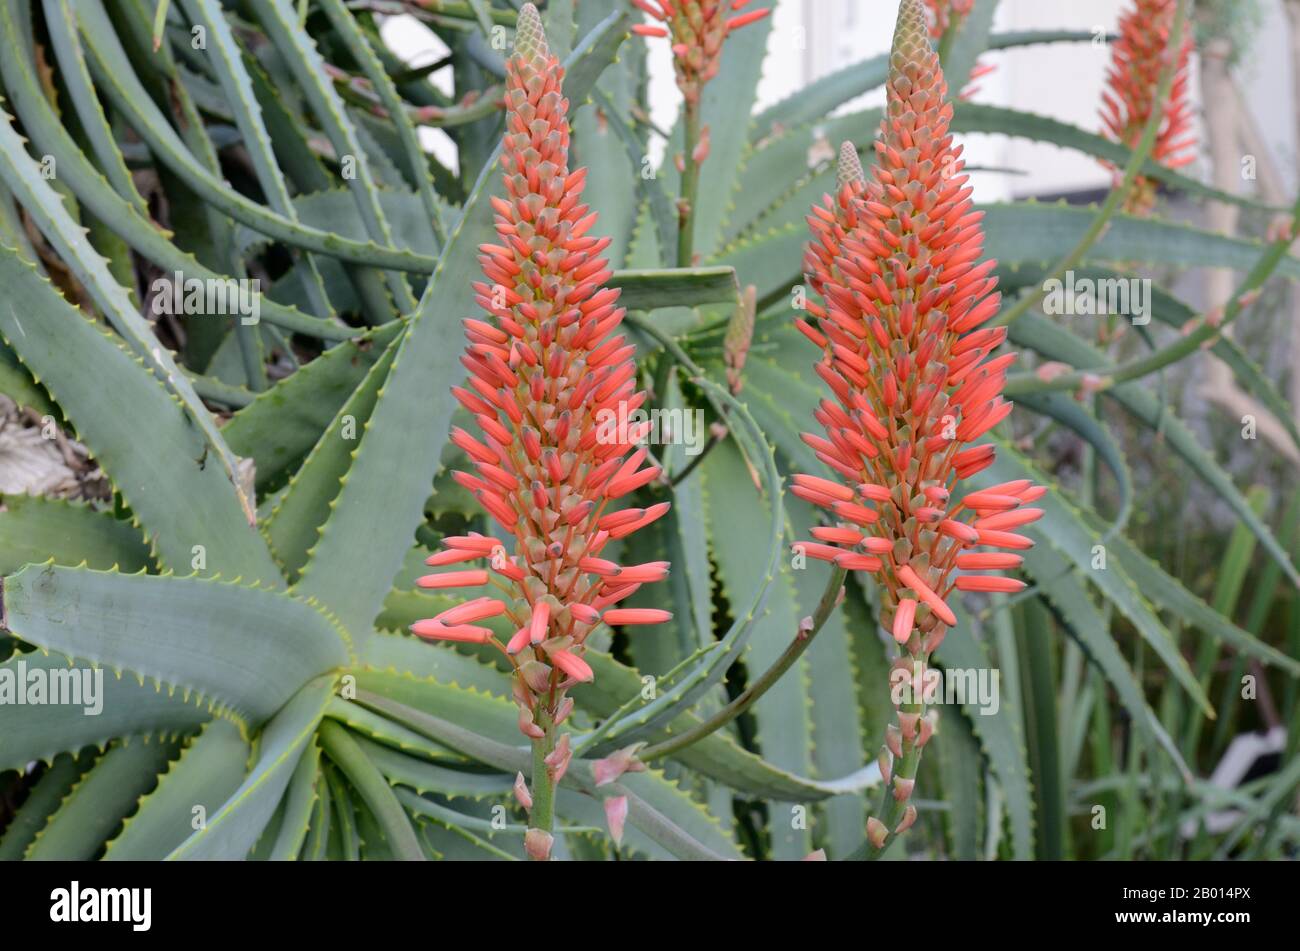 Flowers of Aloe arborescens winter blooming flowering succulent perennial plant torch aloe Stock Photo